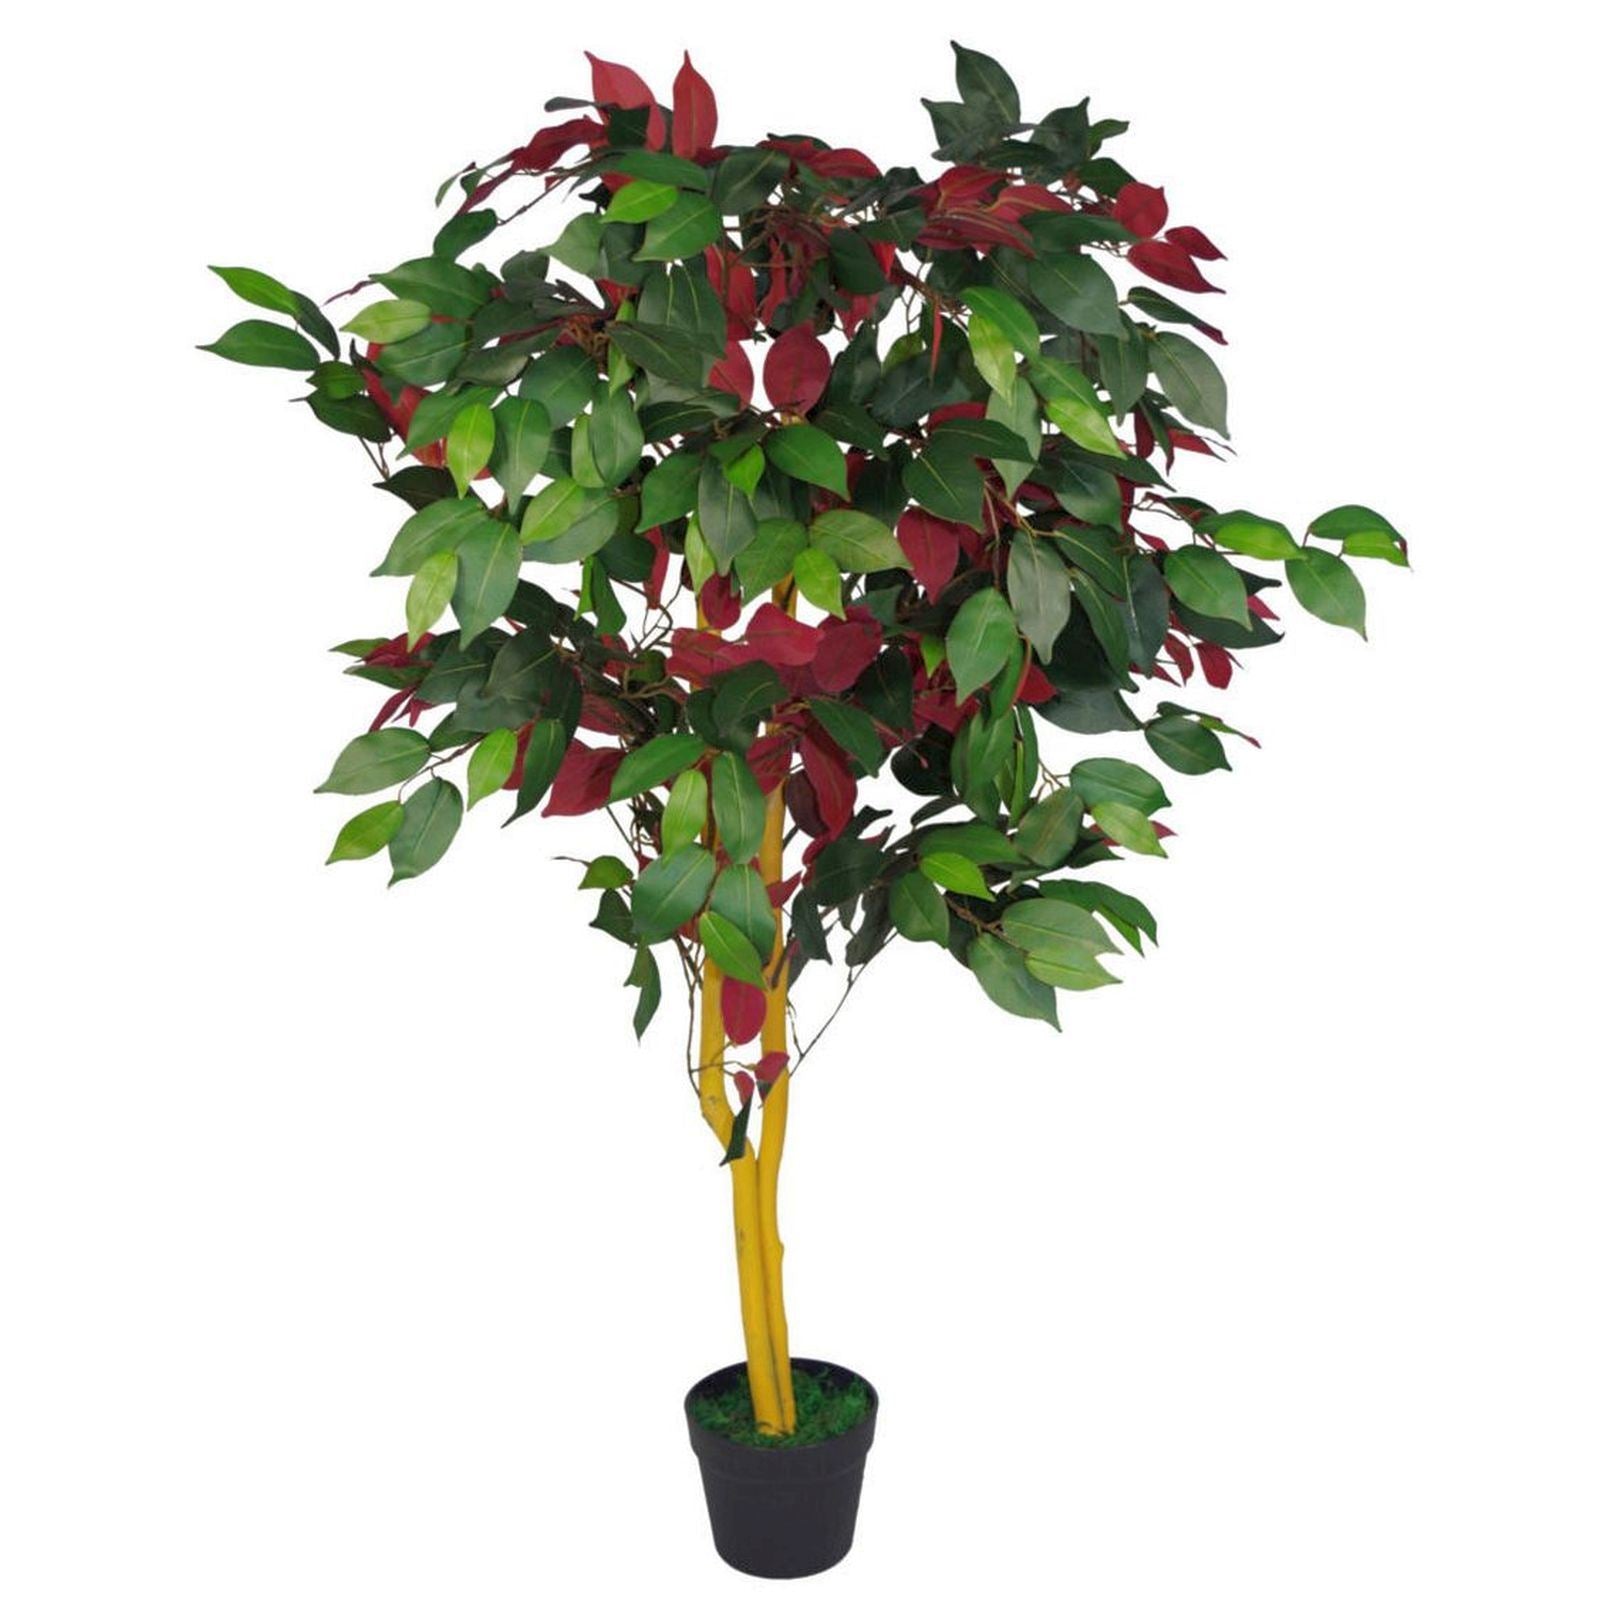 Leaf Artificial Ficus Tree Plant 120cm Red Green Plants